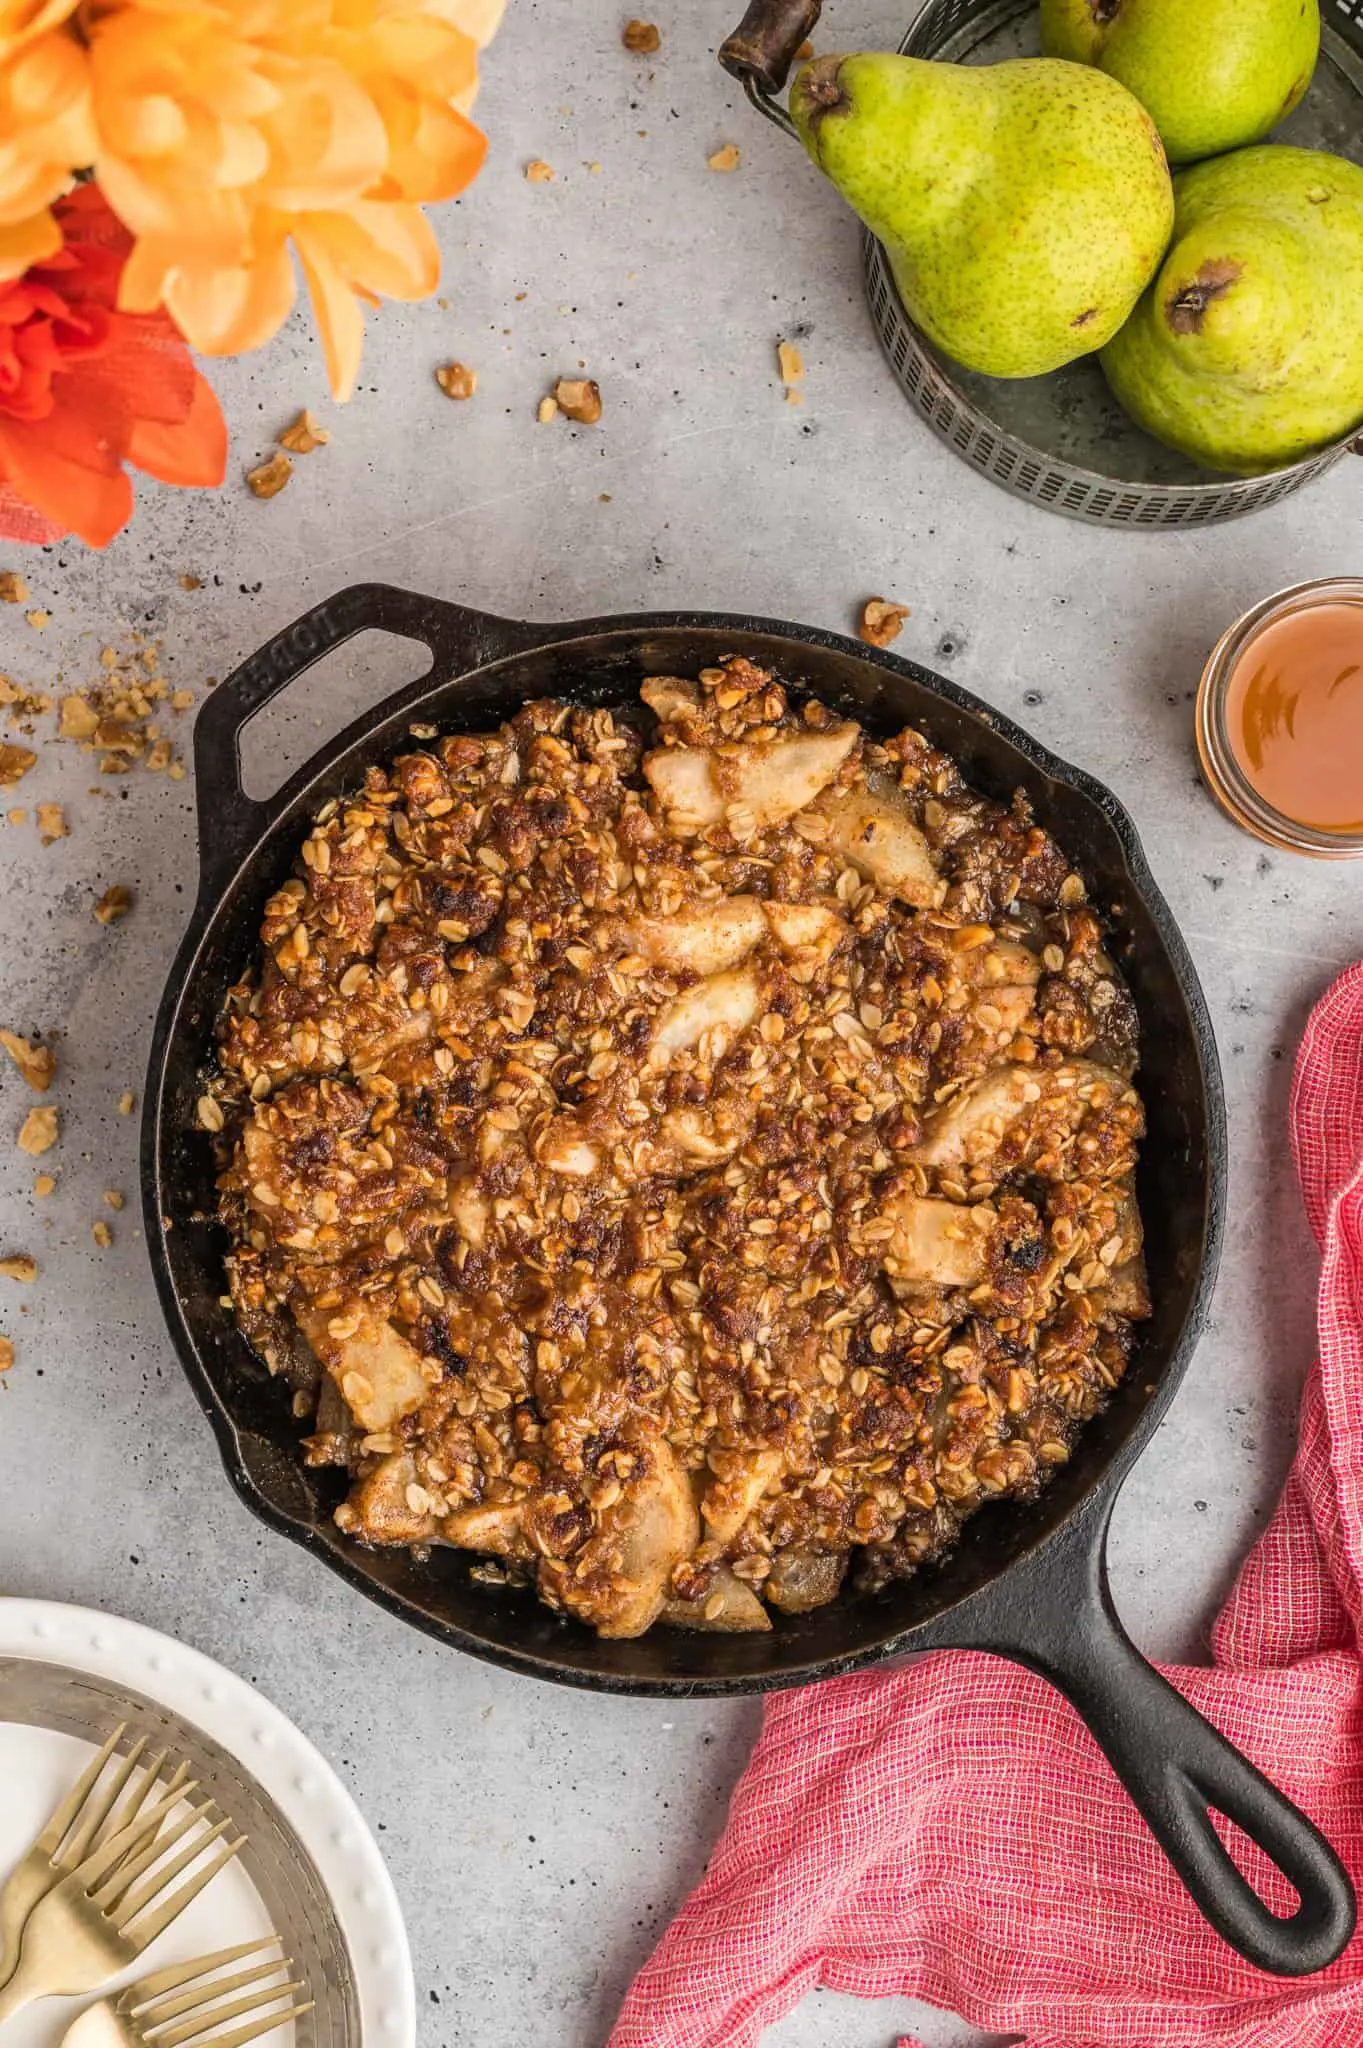 Pear Crisp is a delicious baked dessert with a sweet pear filling and a crunchy oat and walnut crumble topping.